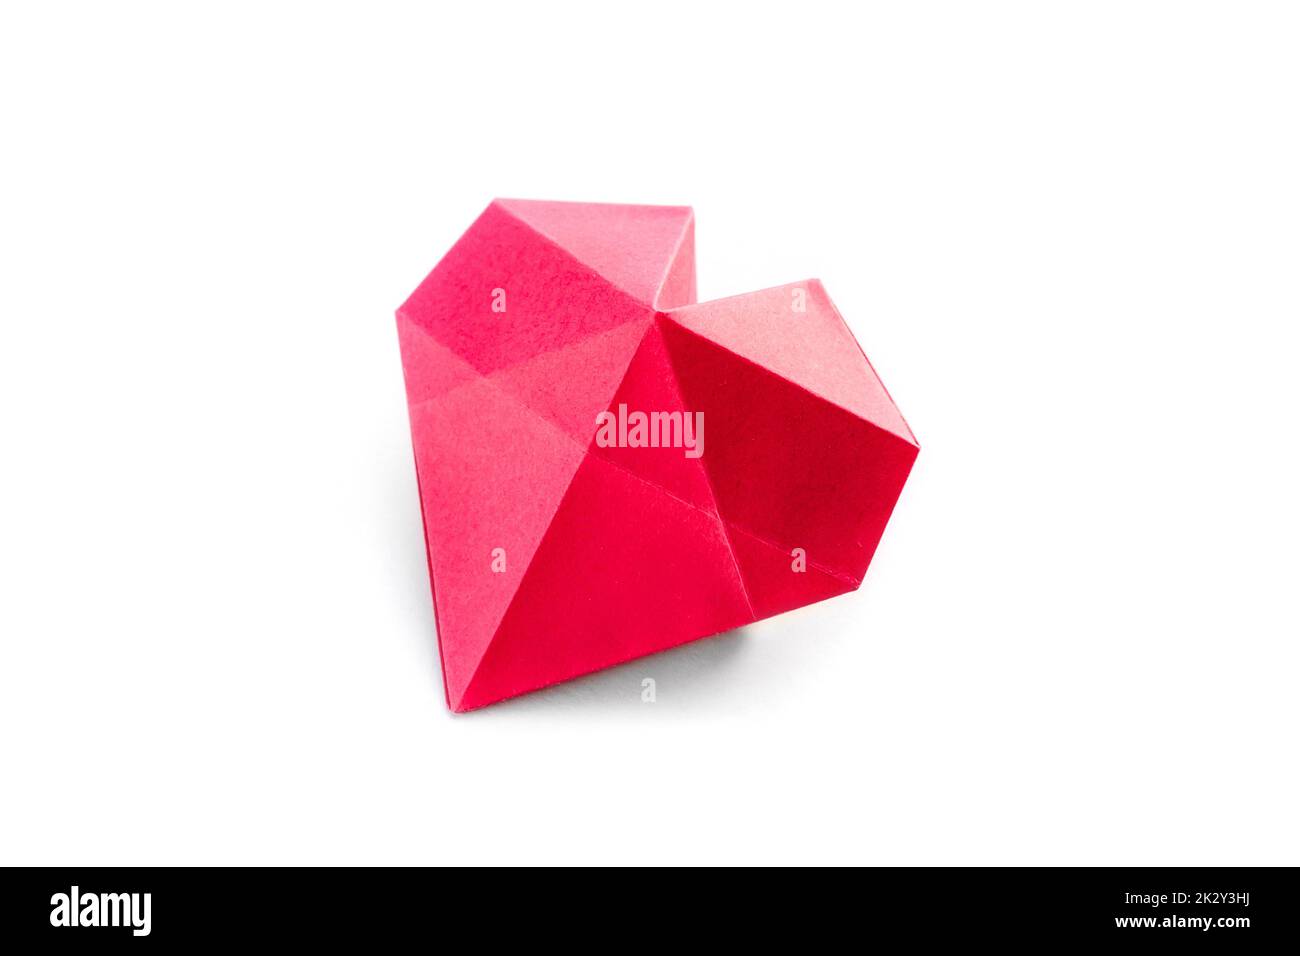 Red paper heart origami isolated on a white background Stock Photo